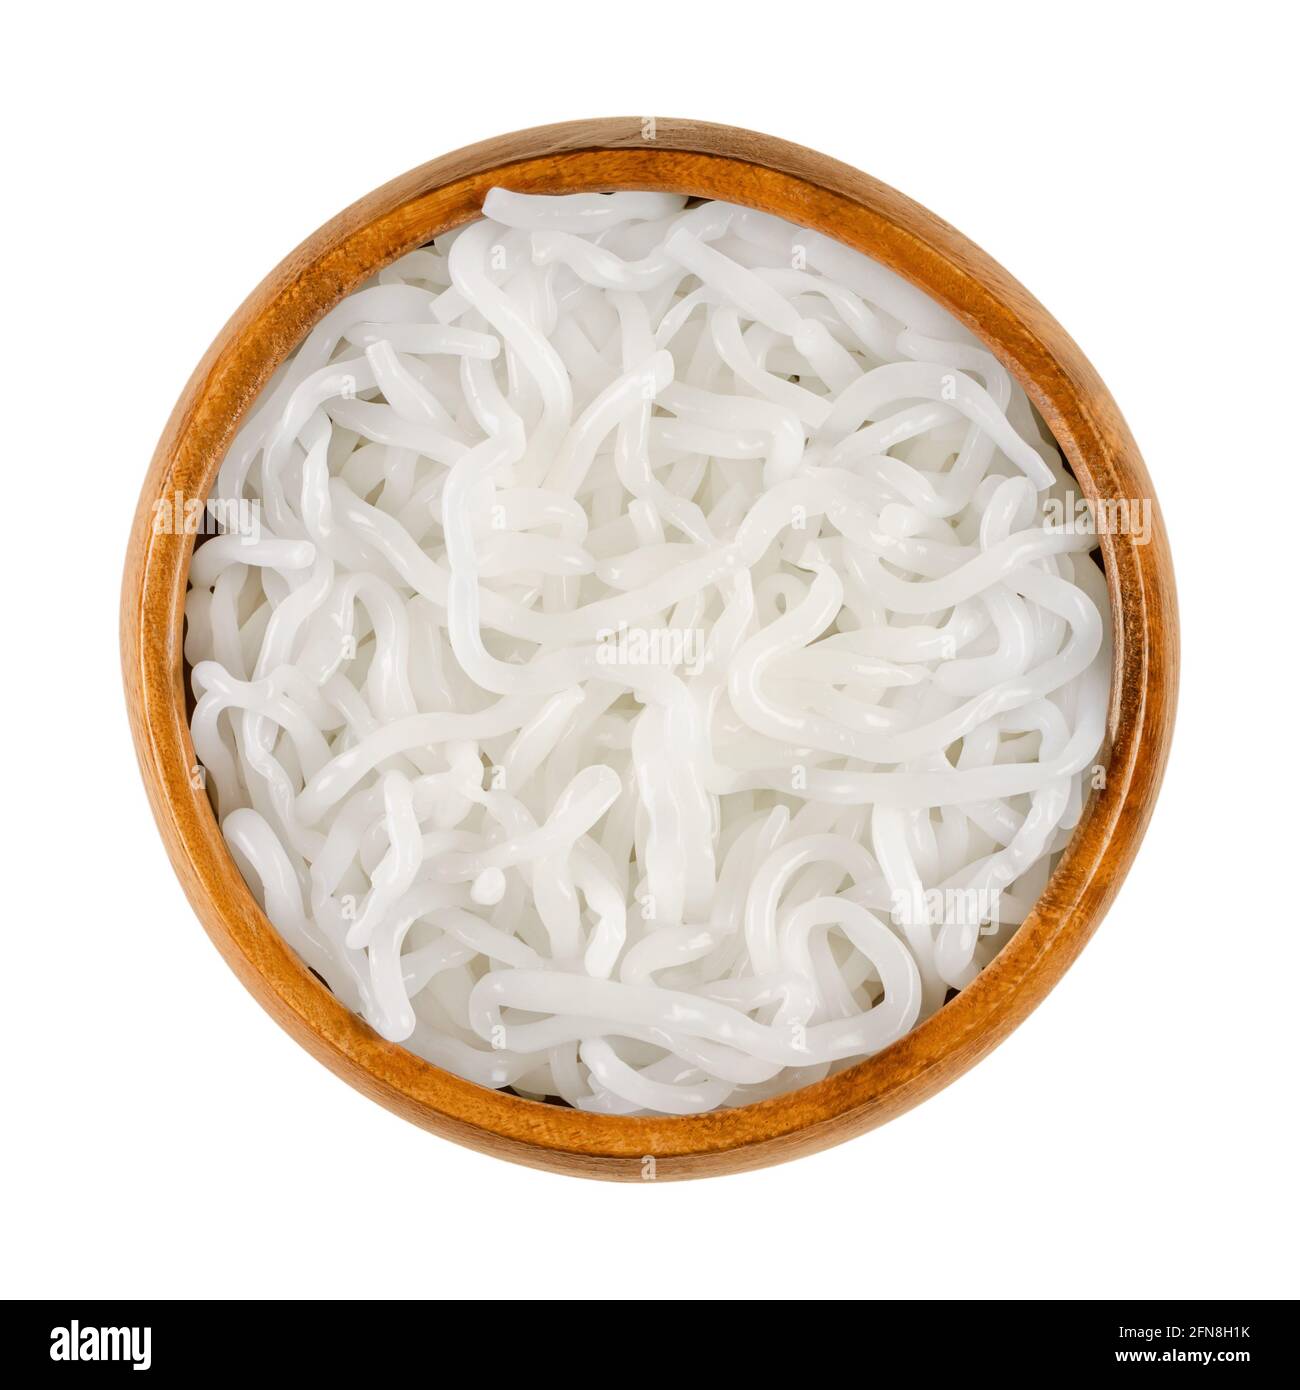 Diet pasta made from alginates, in a wooden bowl. Zero calorie noodles, made of kelp, brown algae seaweeds. Stock Photo